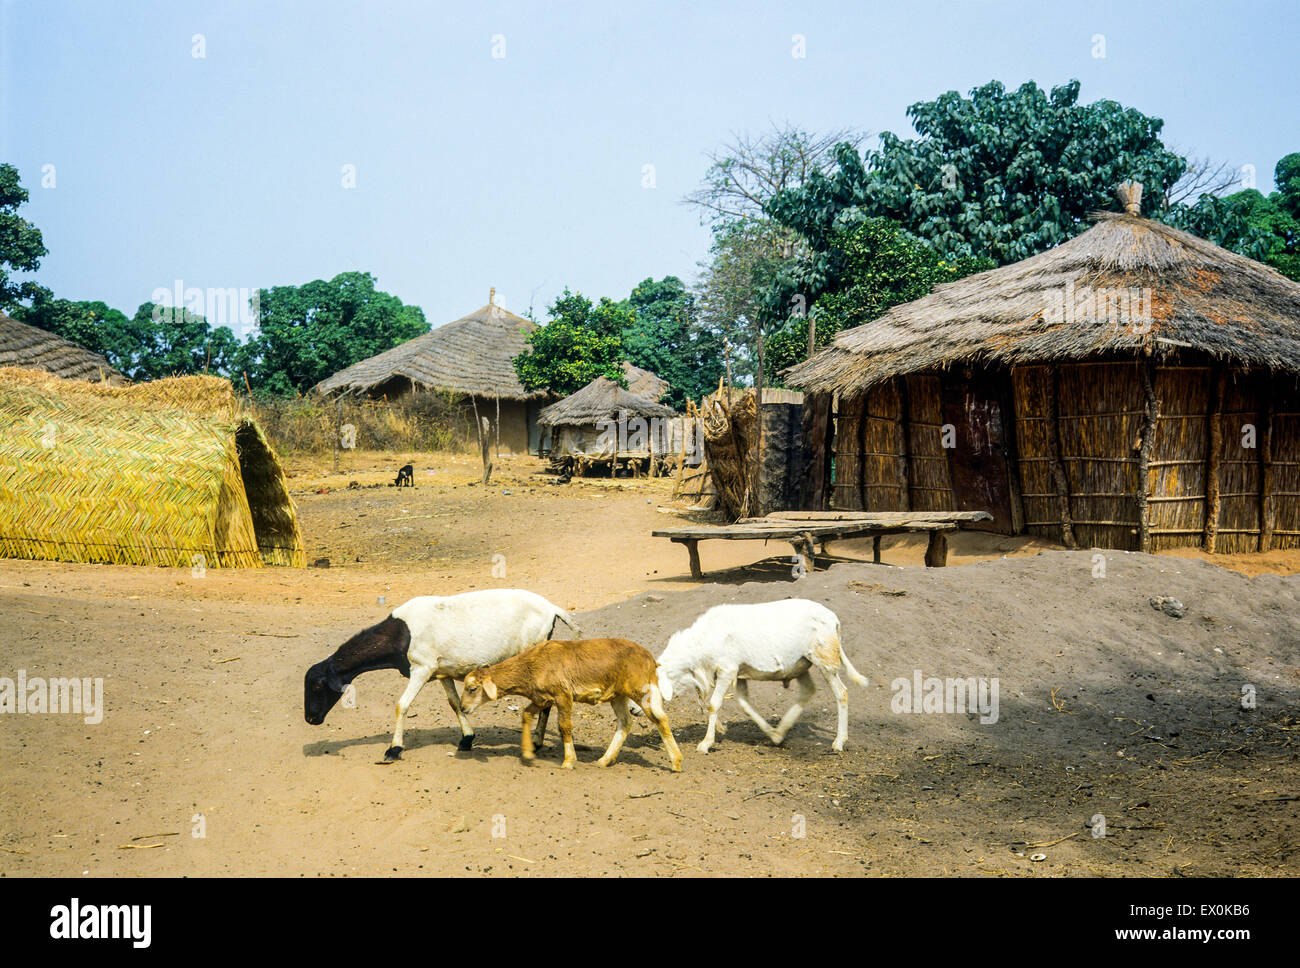 Goats and reed thatched huts, Juffureh village, Gambia, West Africa Stock Photo